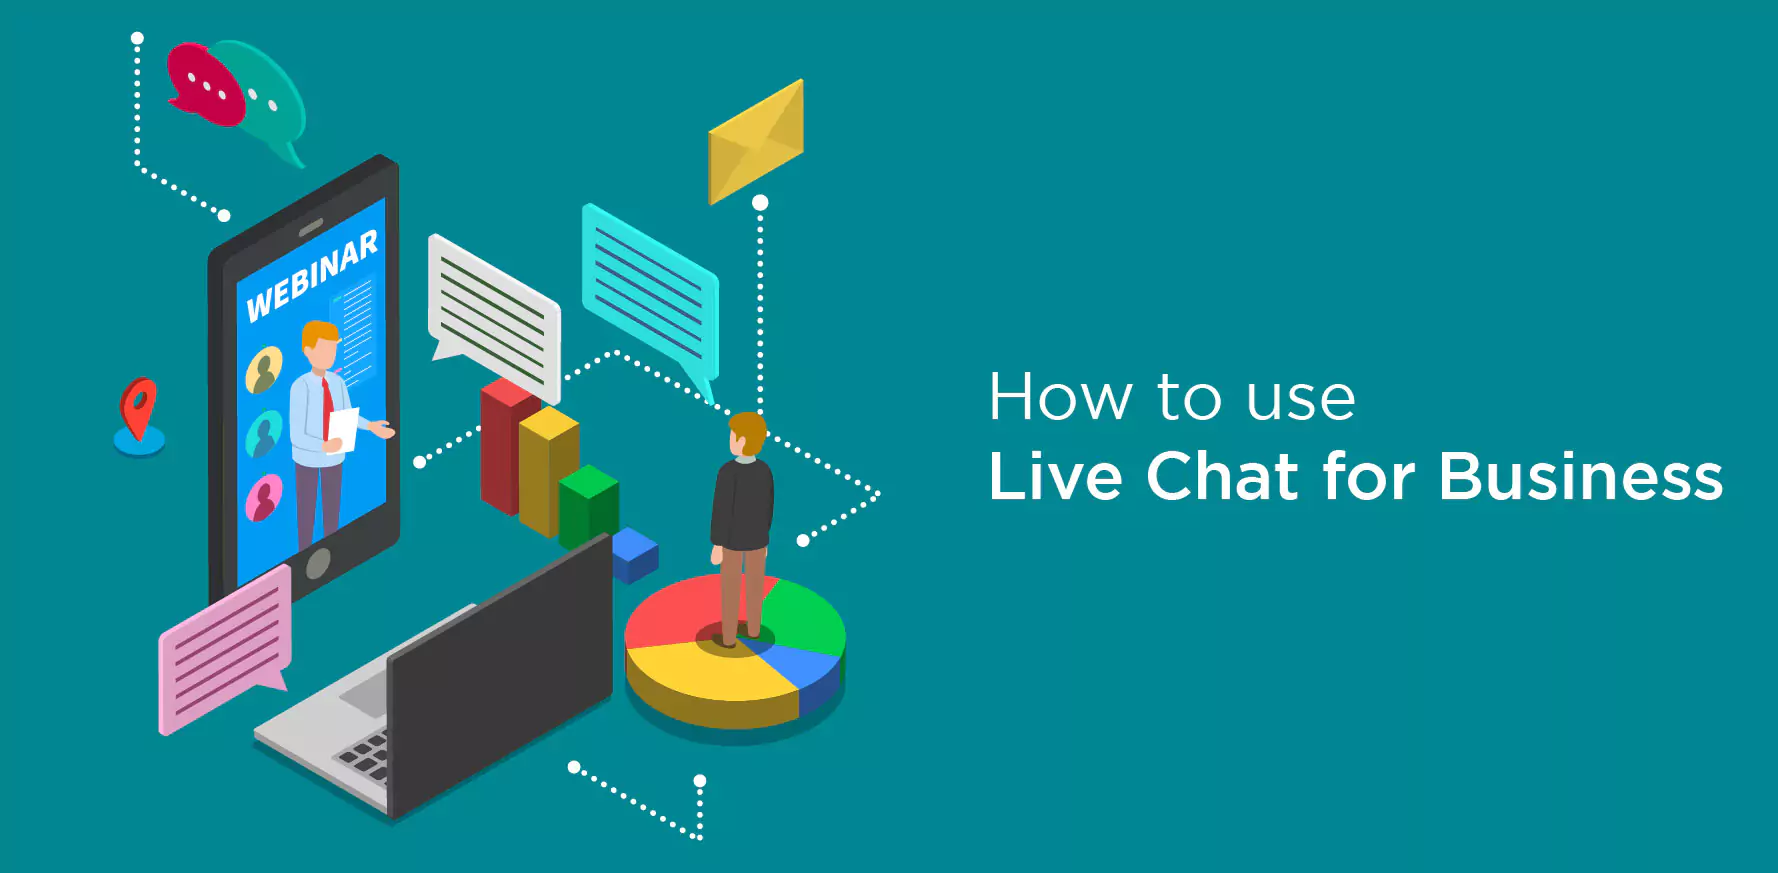 How to use live chat for business